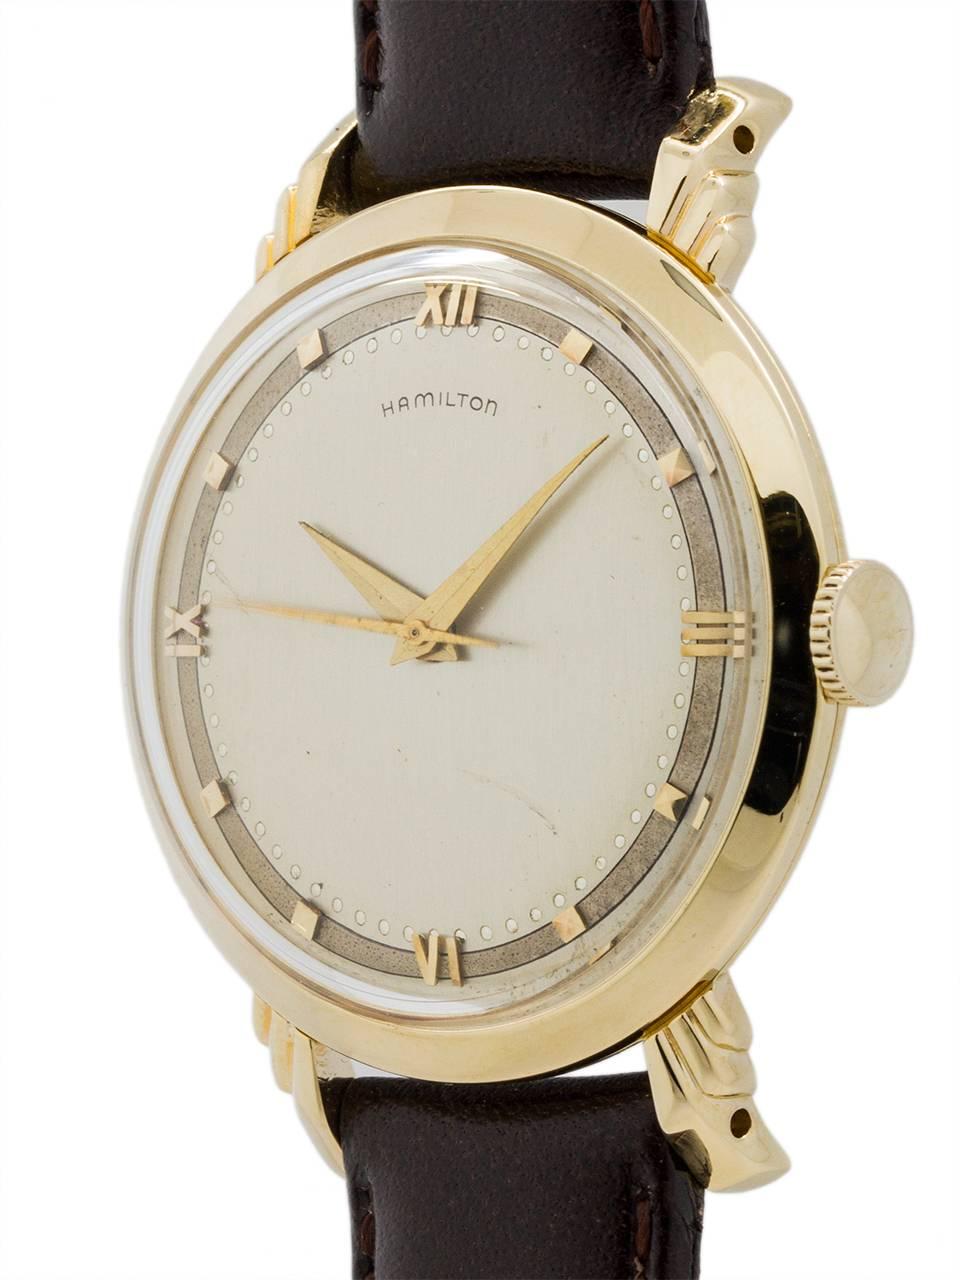 An unusually large for the era 14K YG man’s vintage Hamilton dress model circa 1953. Featuring 34 x 42mm case with “winged” design stepped lugs. With original beautiful condition 2 tone silver satin dial with 18K YG applied Roman figures and indexes